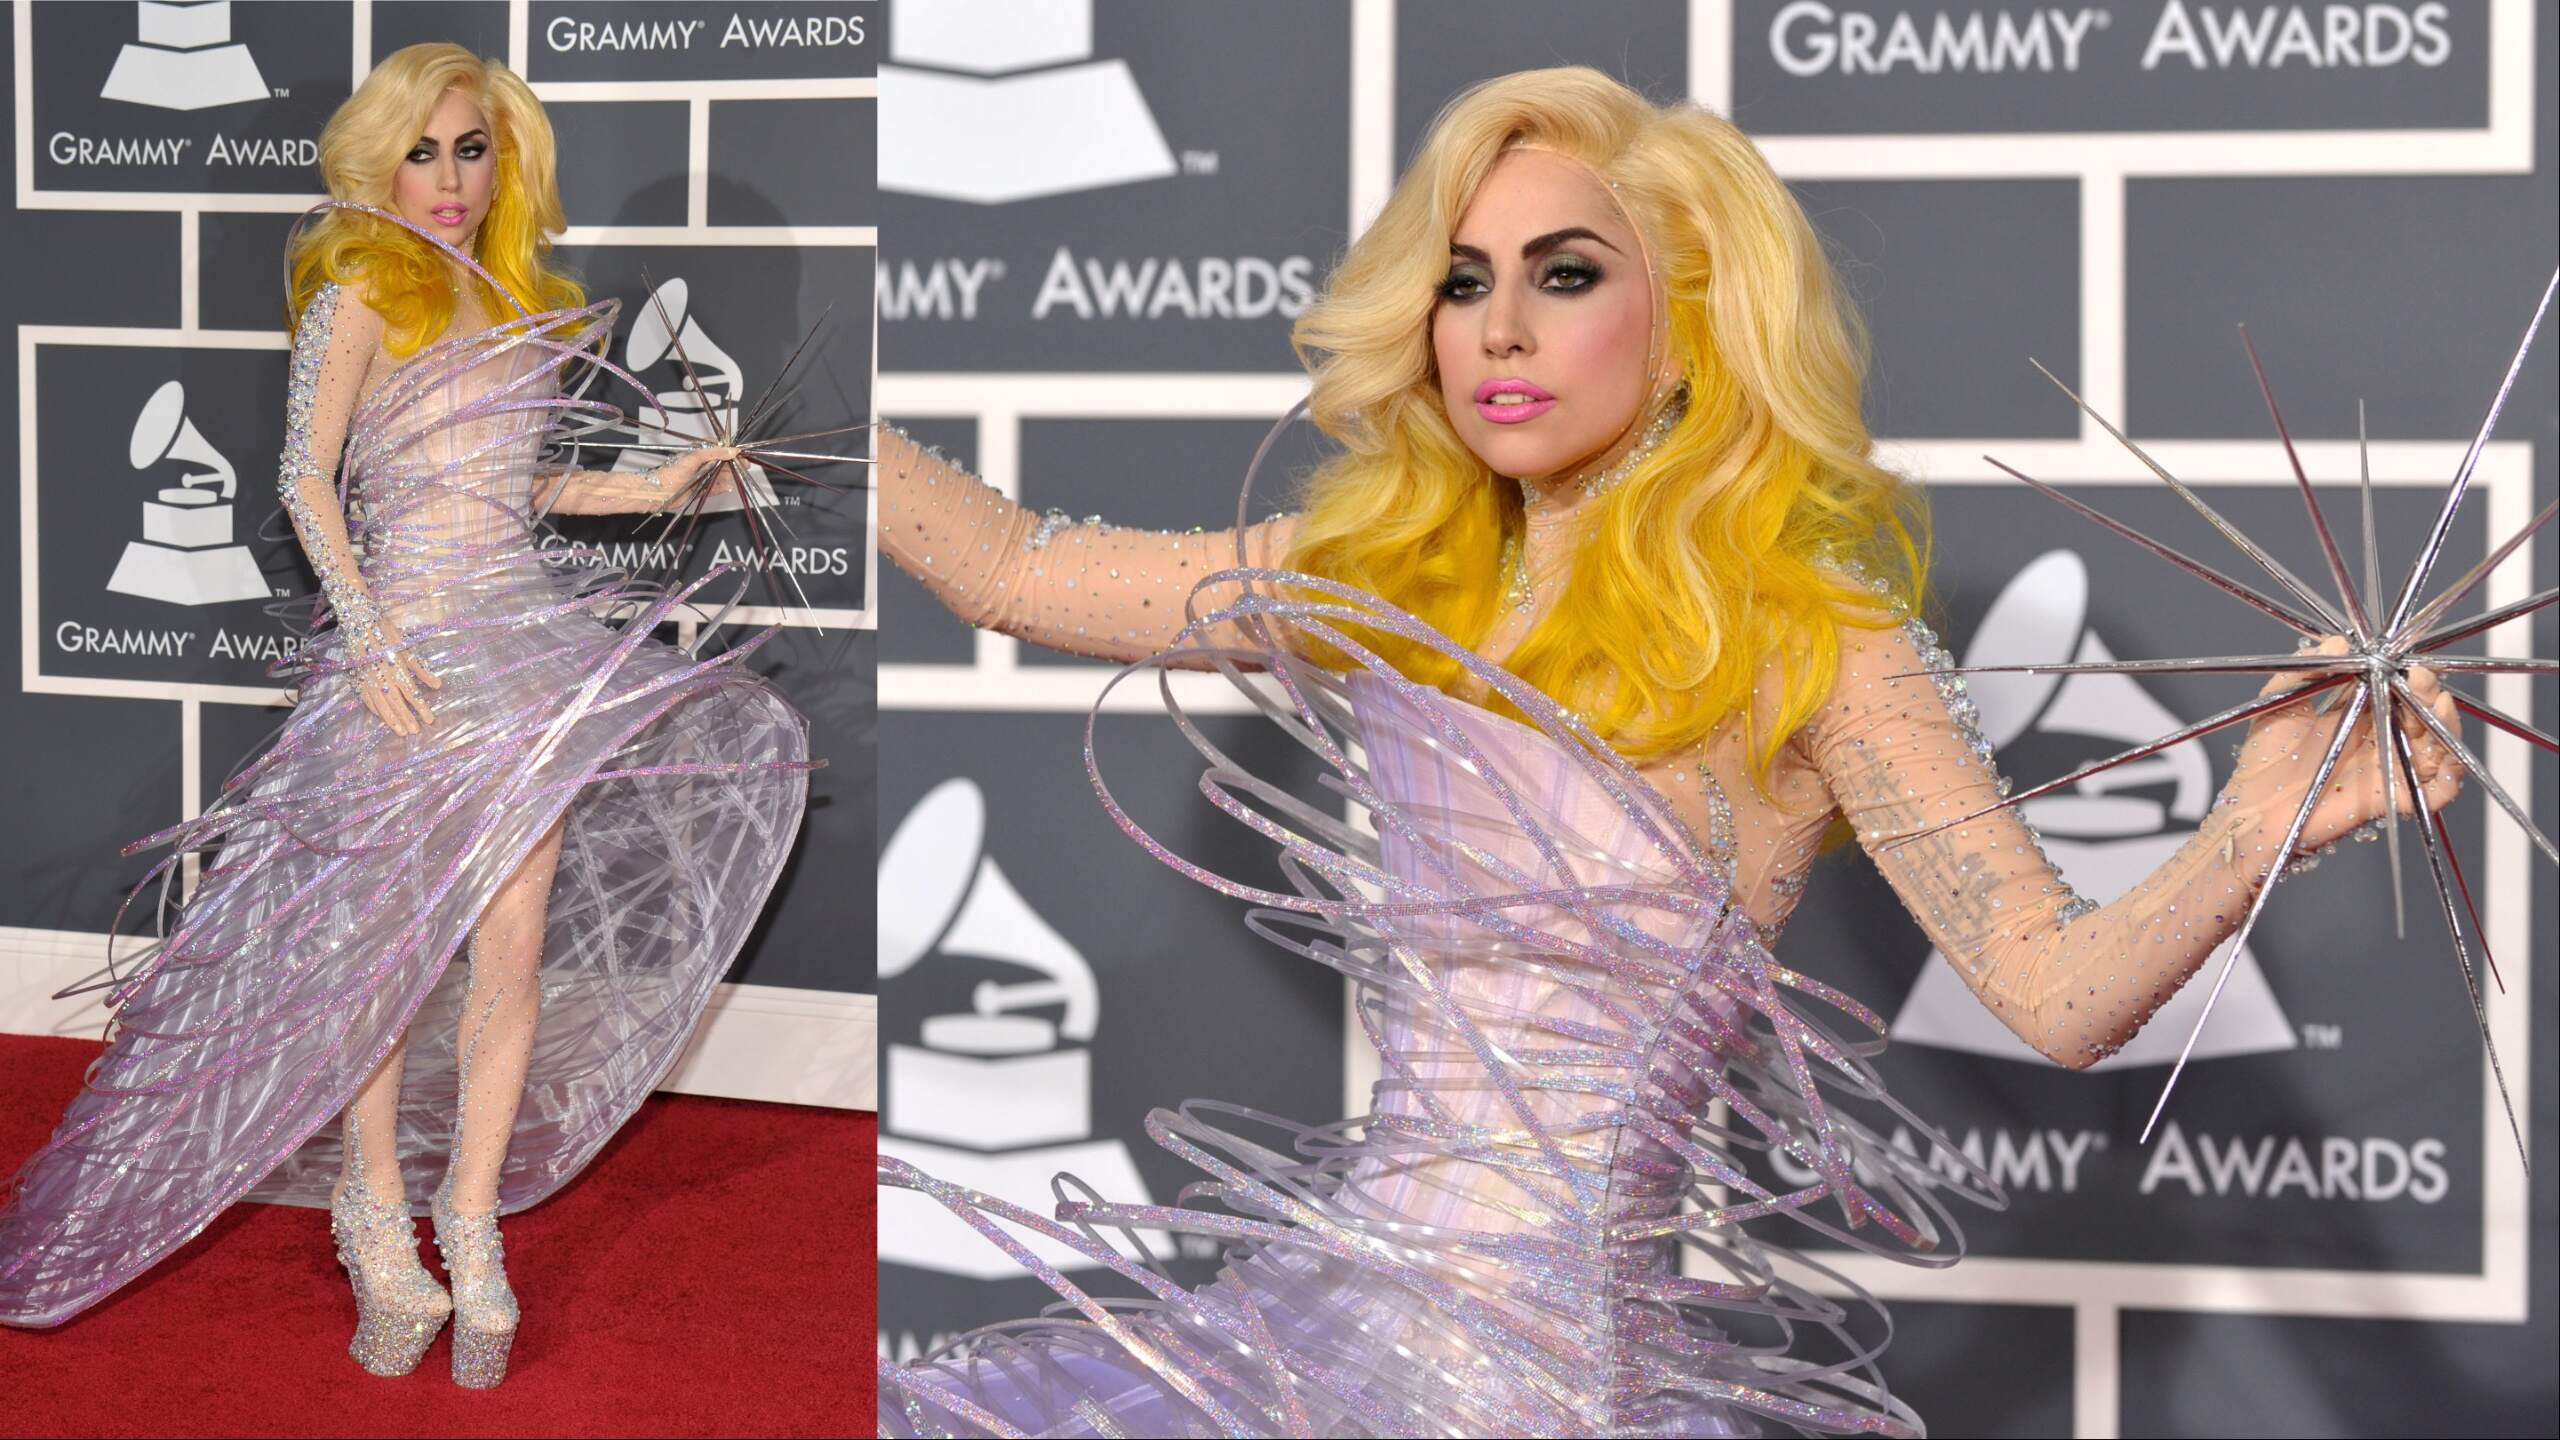 Singer Lady Gaga arrives at the 52nd Annual GRAMMY Awards holding a starburst and wearing a purple dress